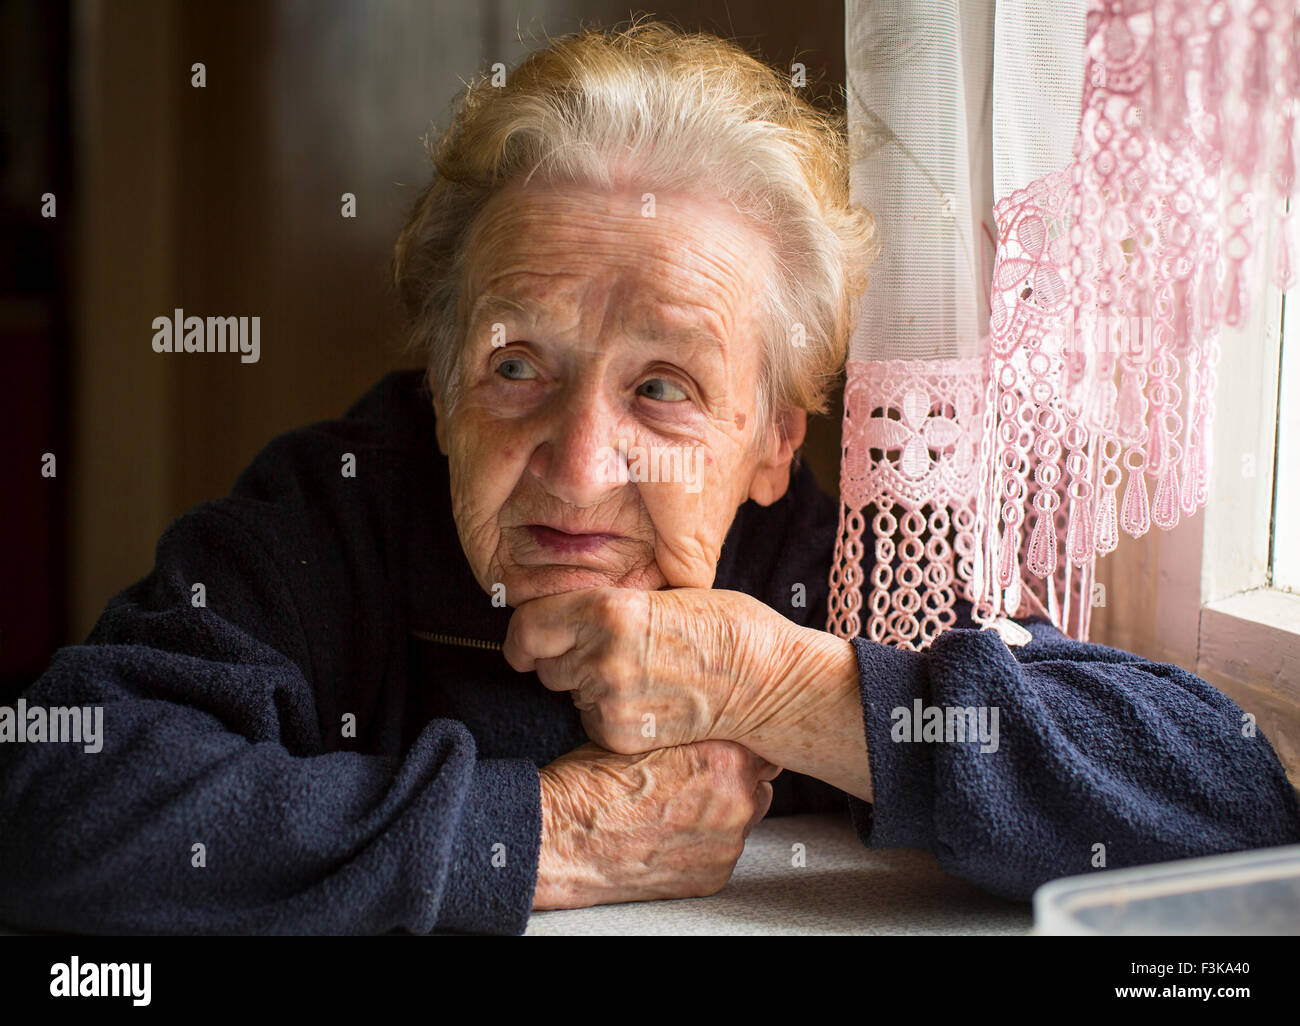 Elderly woman sitting at table in the house. Stock Photo